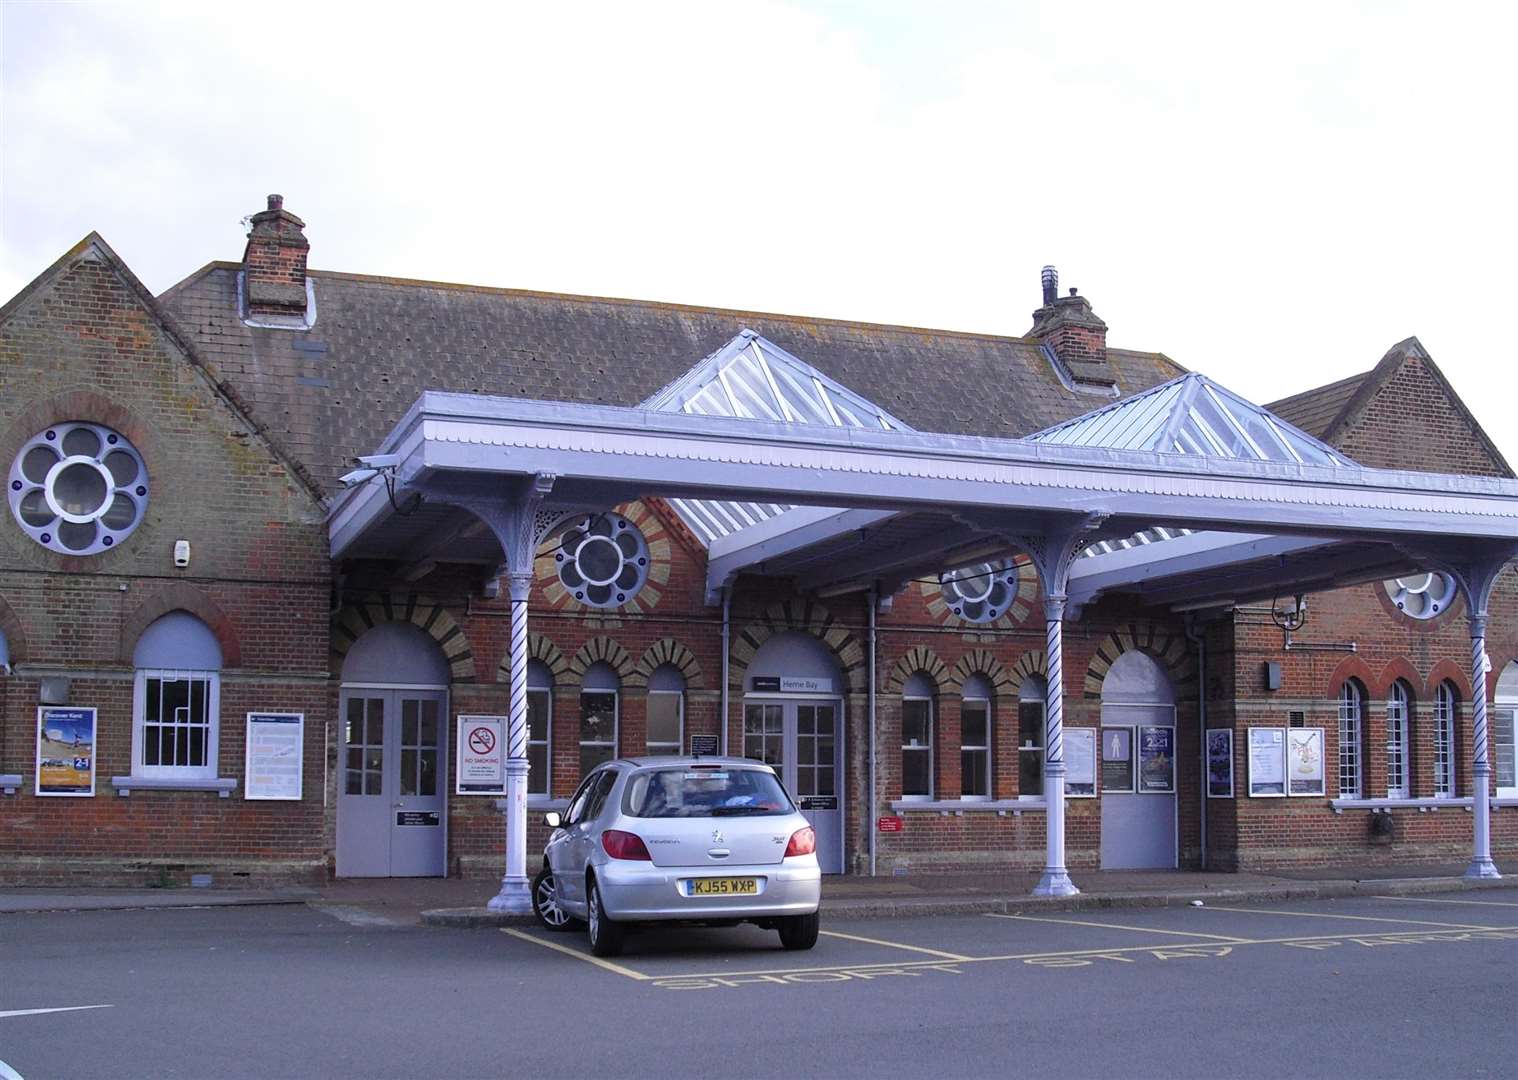 The incident happened at Herne Bay railway station on Saturday night